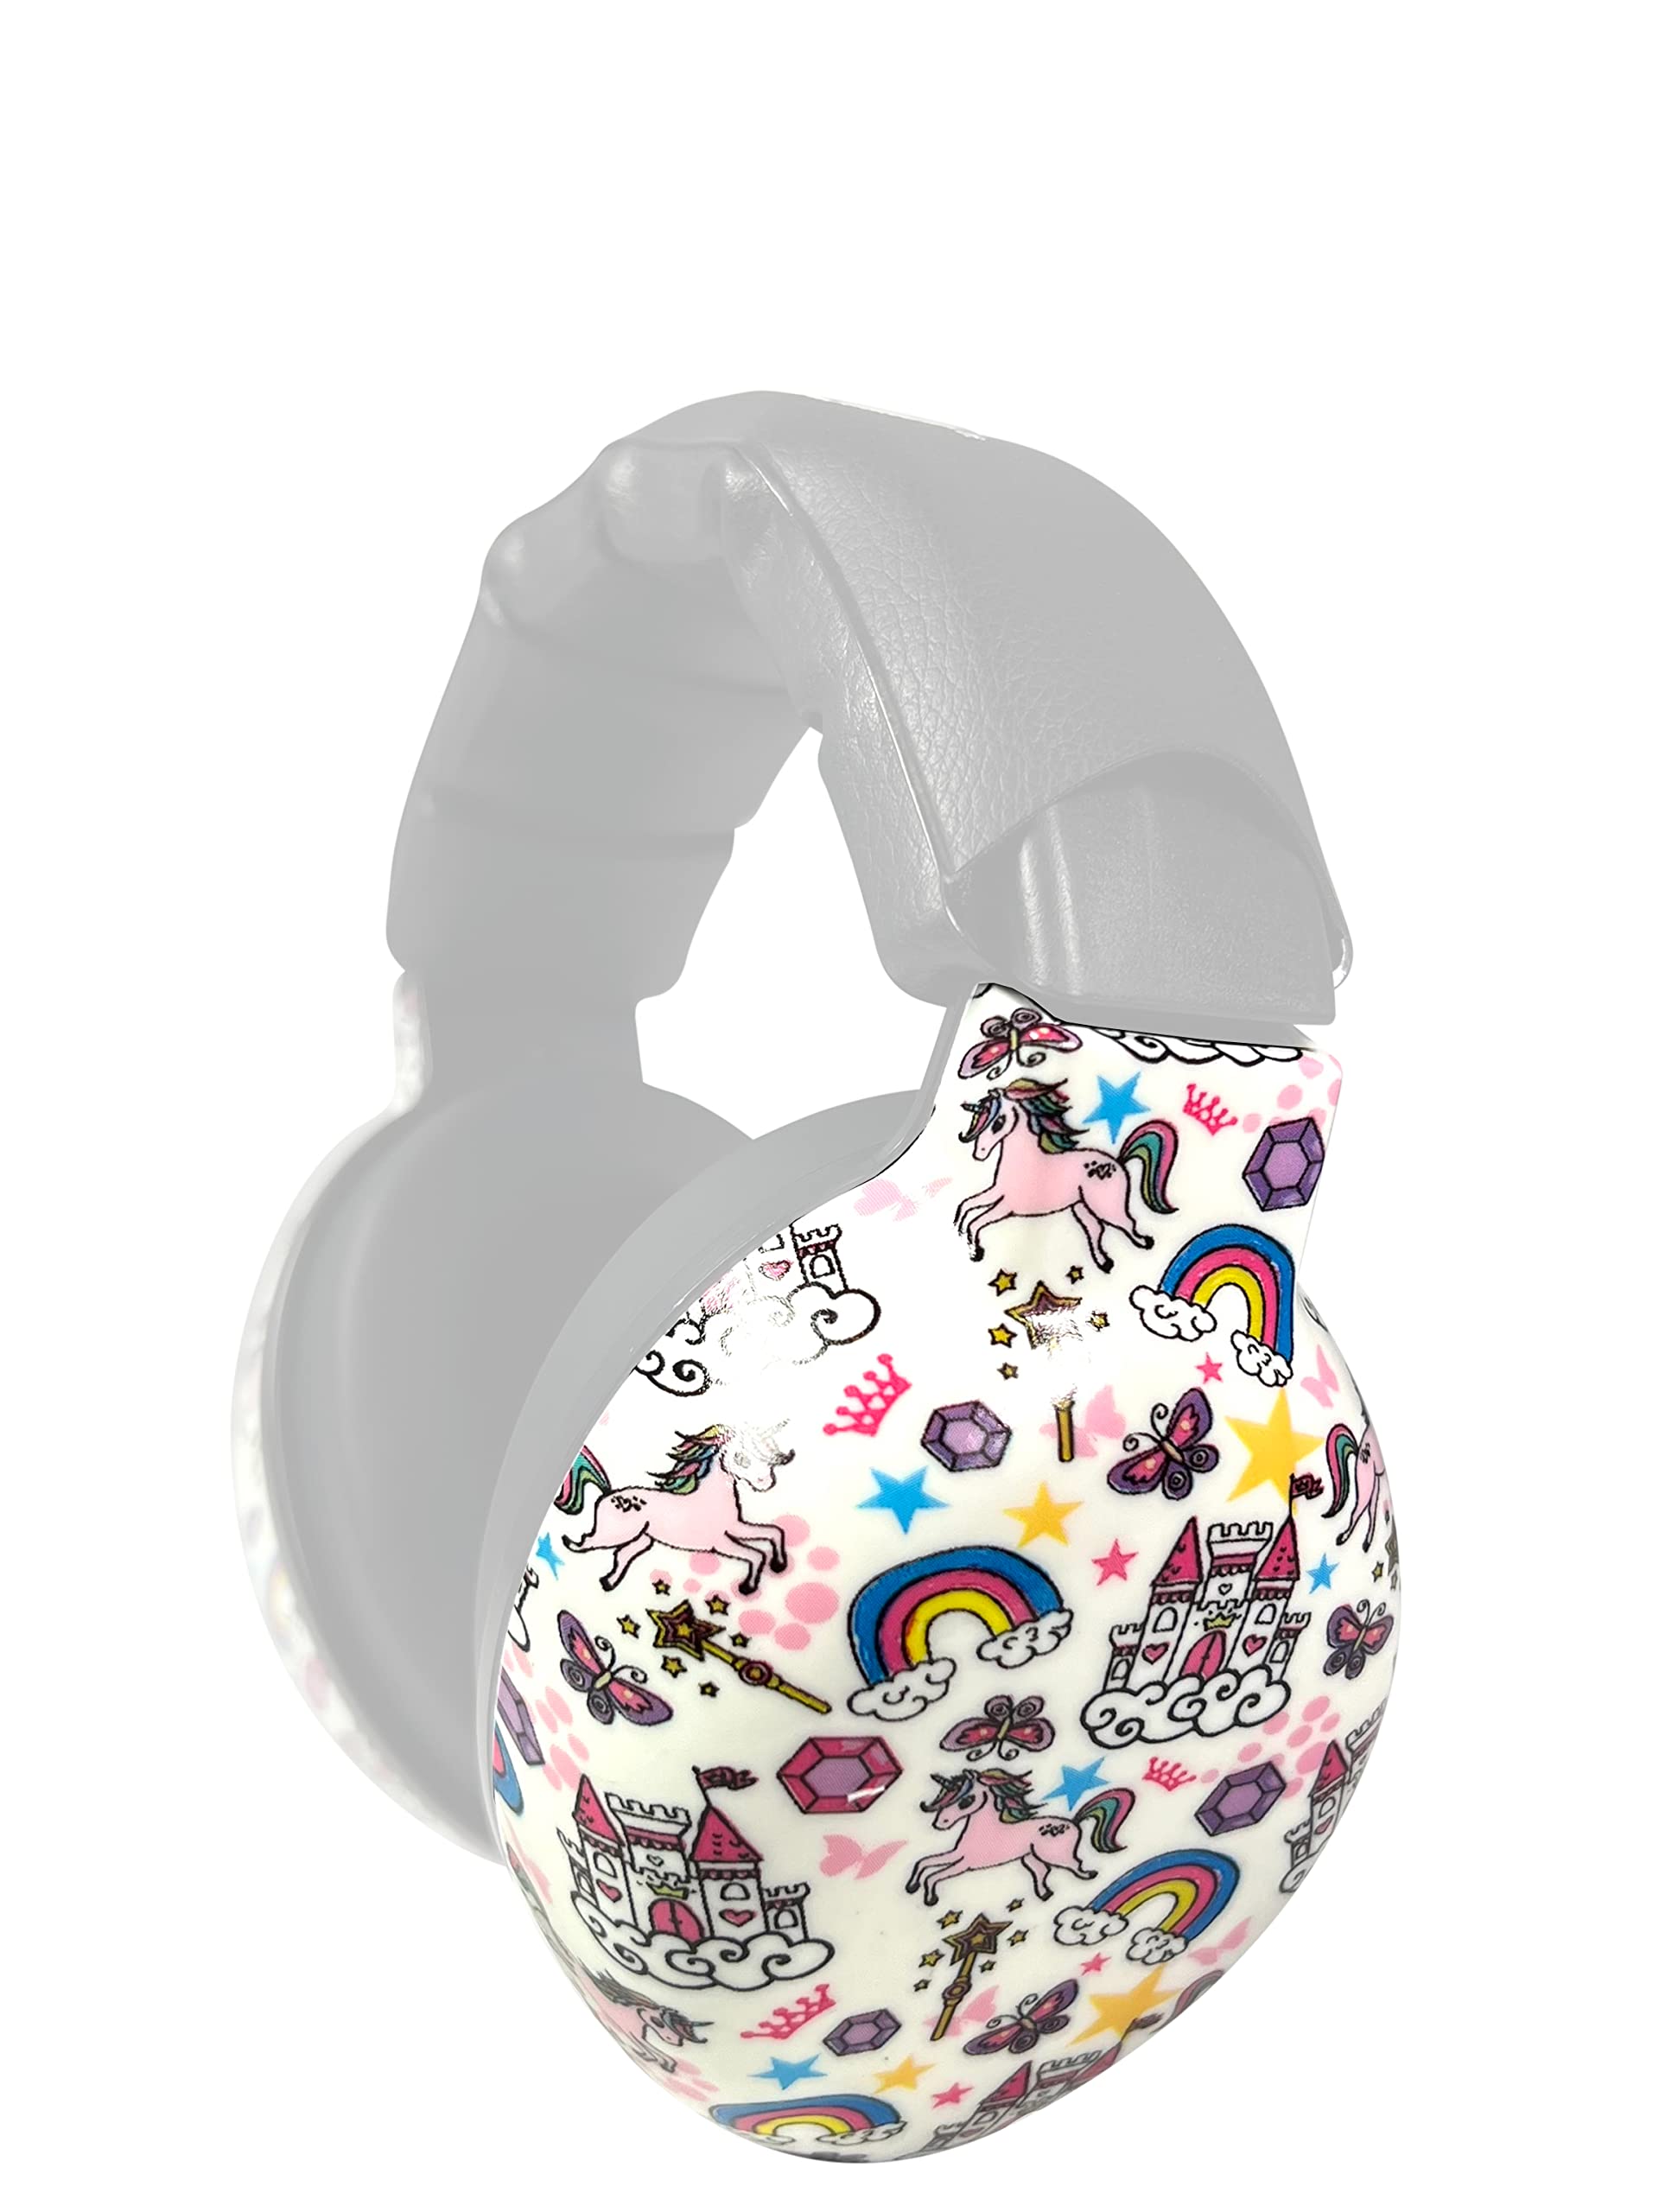 ZIPZ Baby & Toddler Earmuffs PLUS 1 Extra Set of Princess Shells – Innovative Design – Change Colors with Magnetic Shells – Hearing Protection Headphones 0-4 yrs